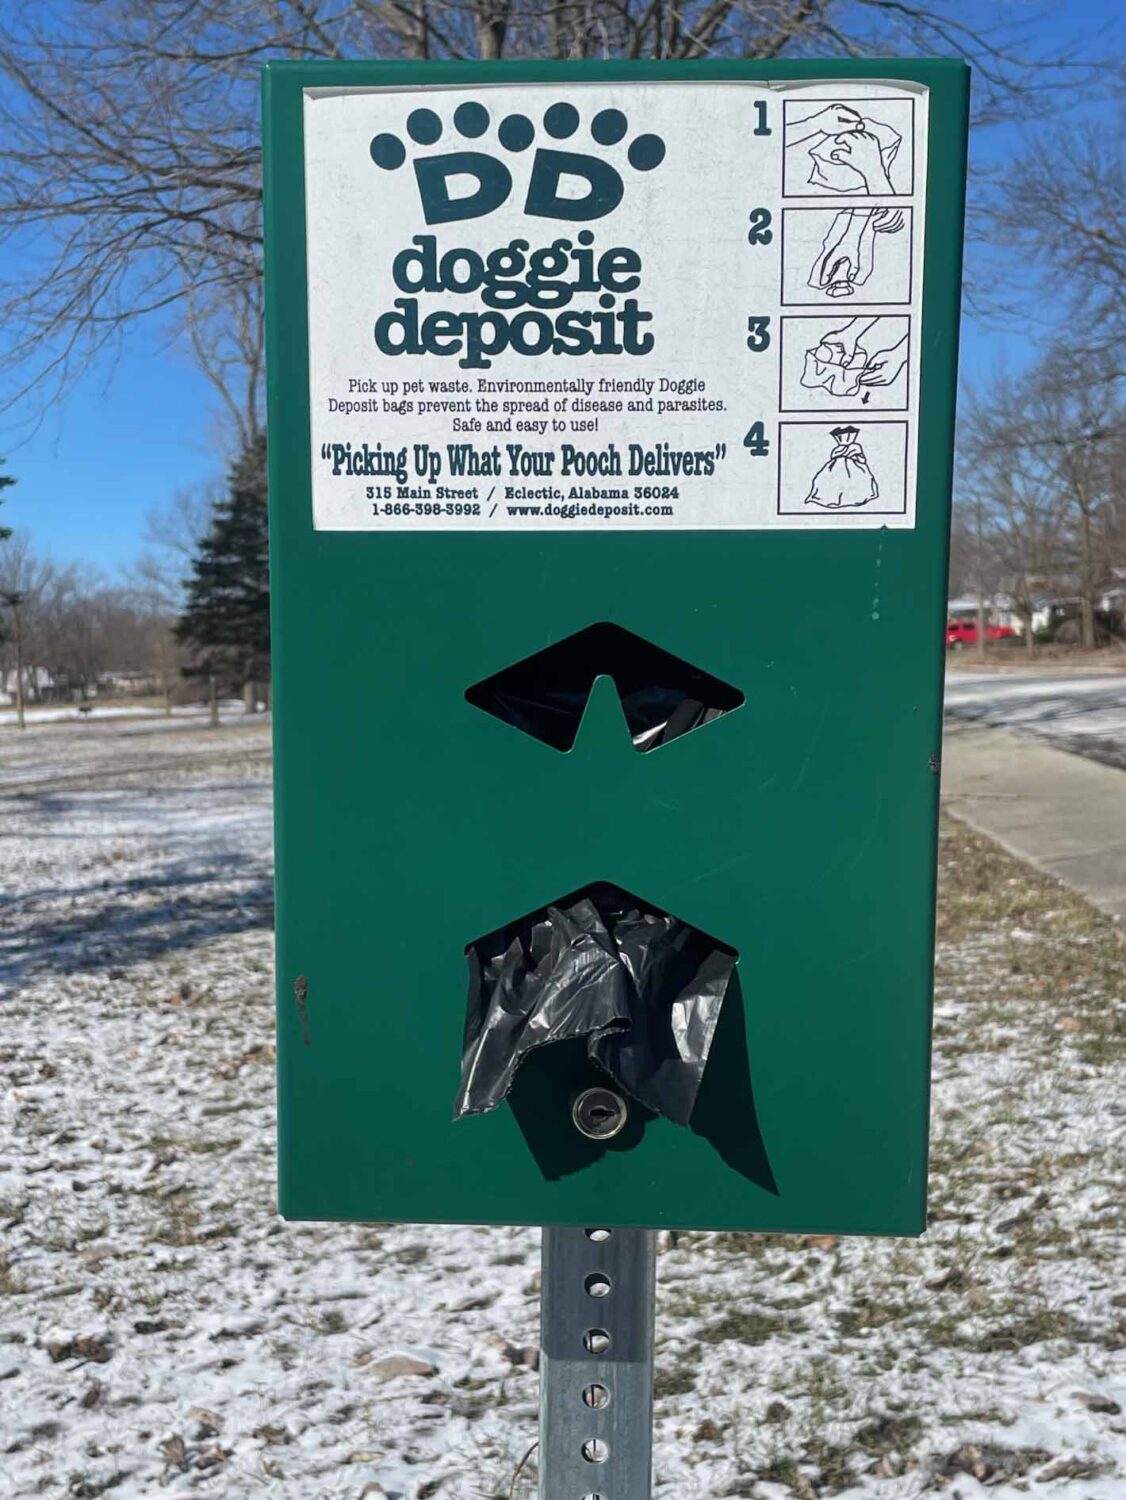 metal rectangular dispenser of dog excrement bags in a park setting